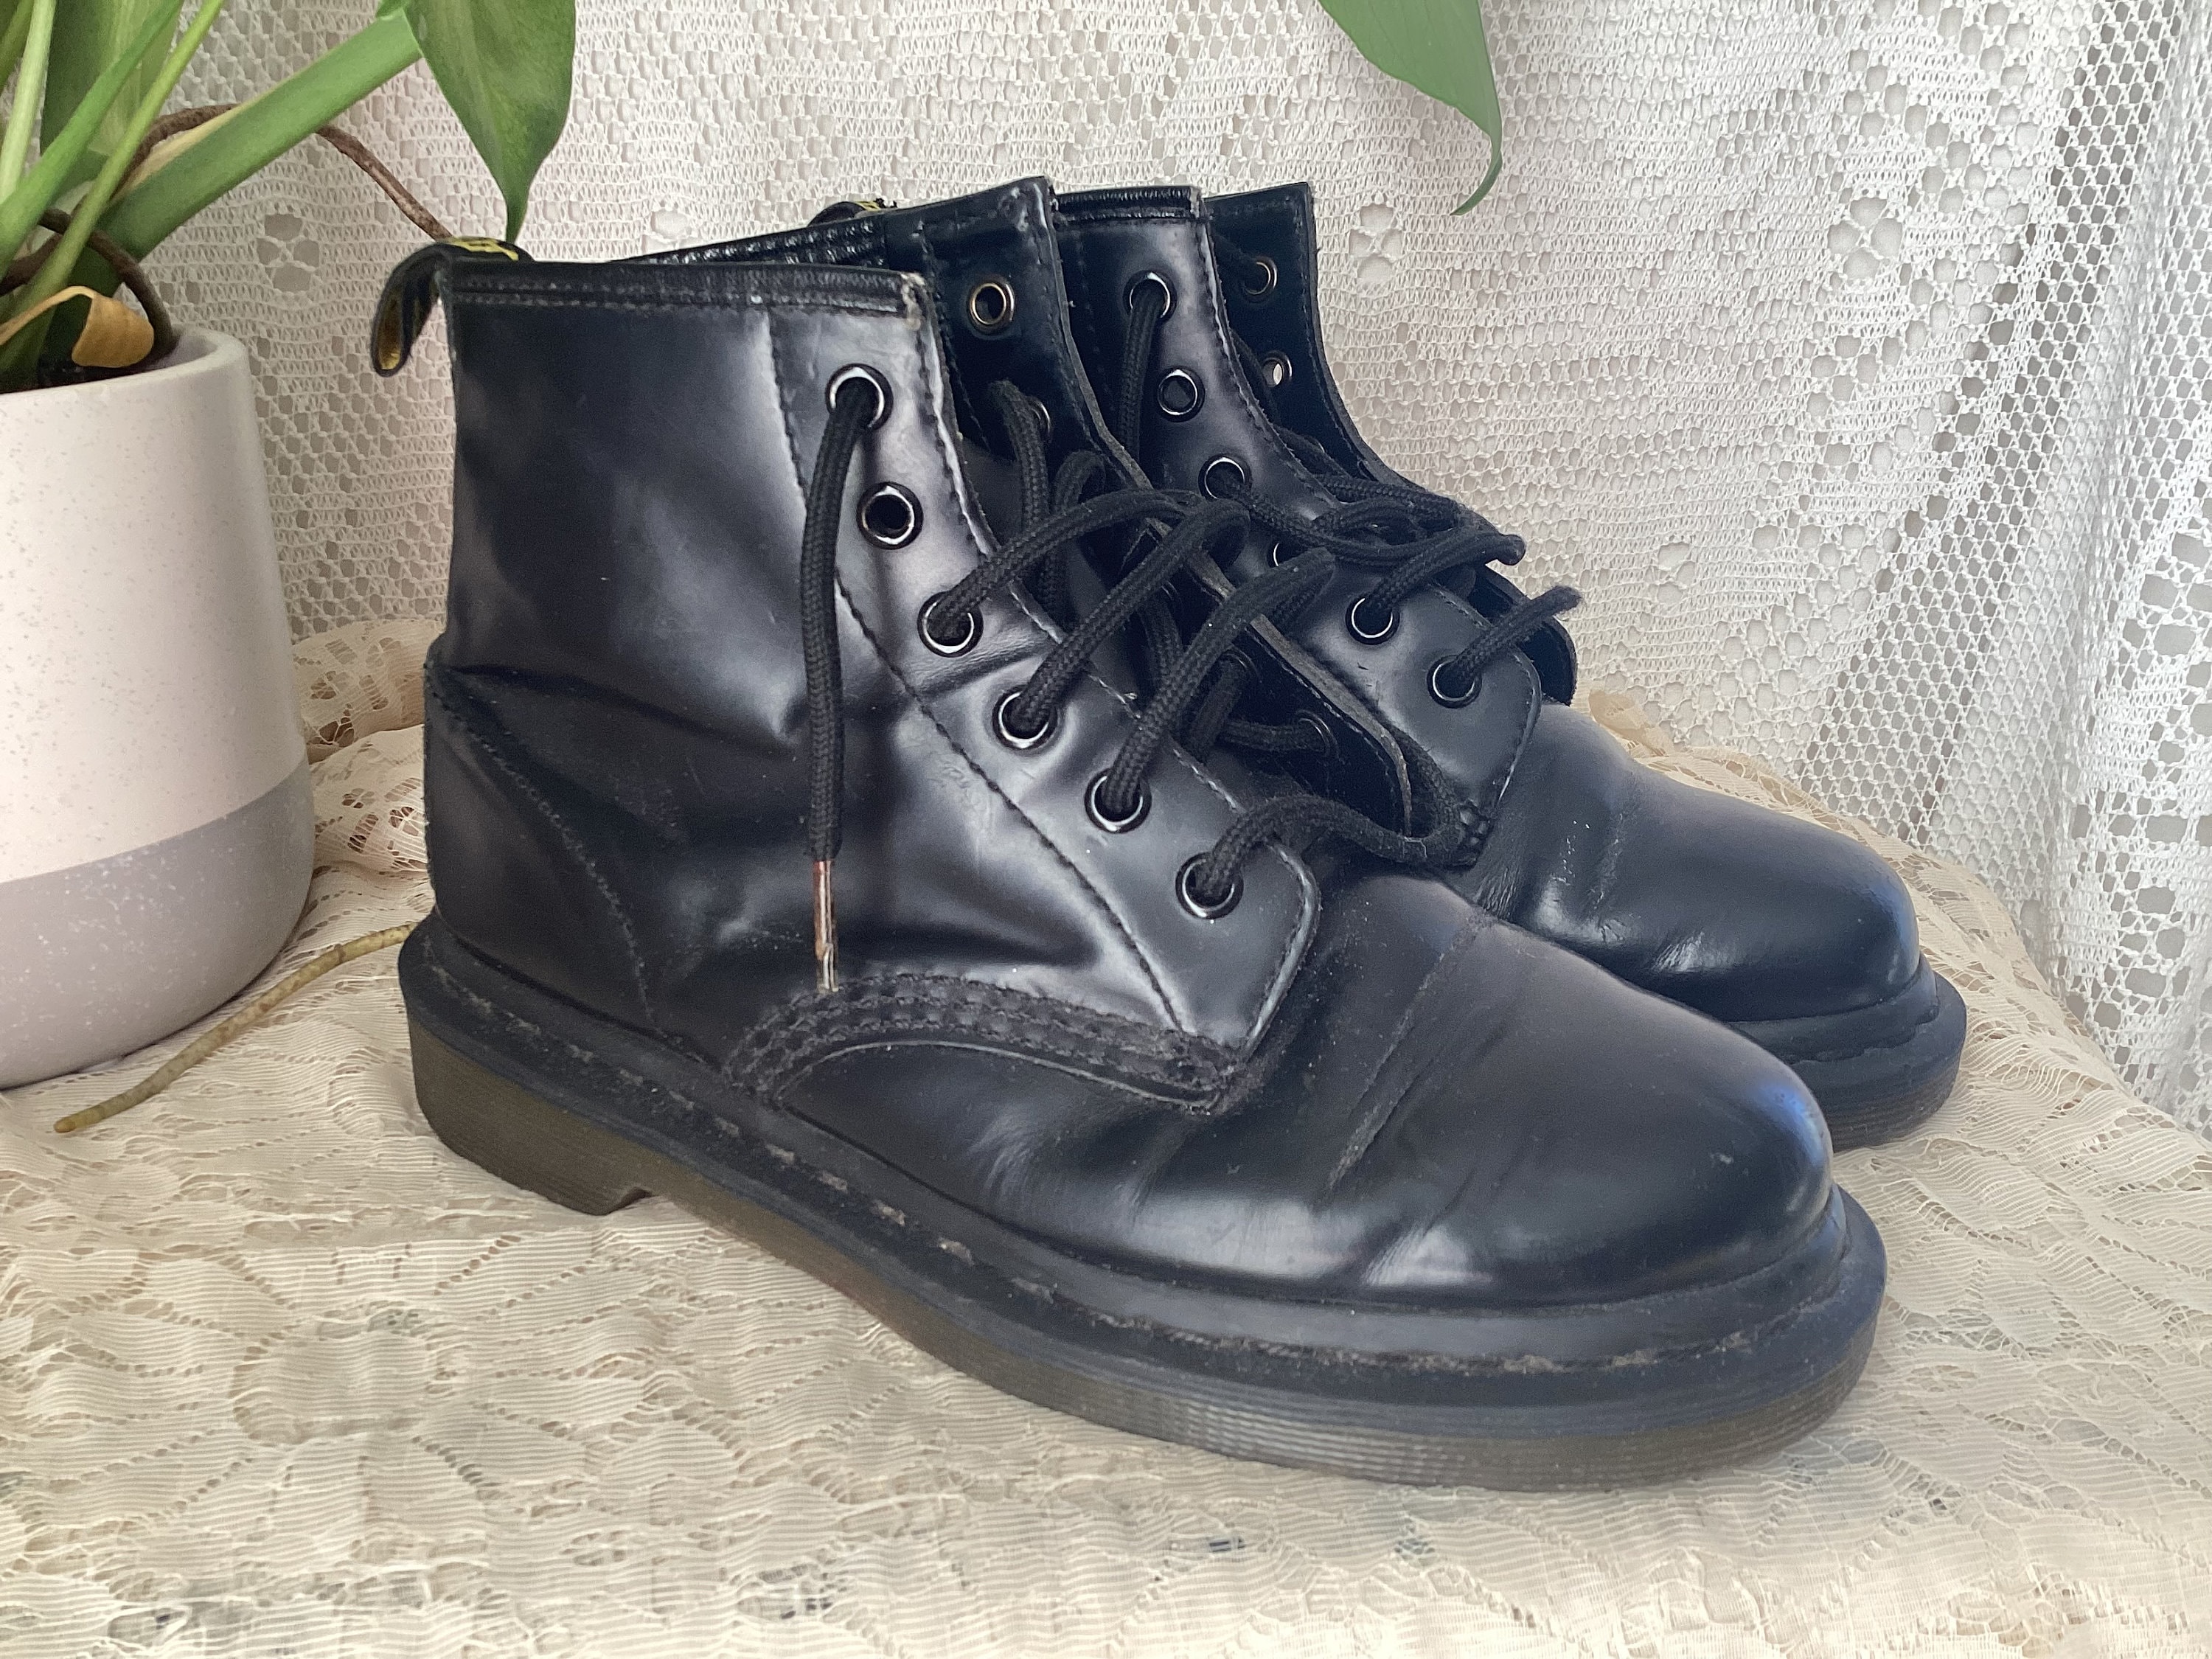 Otoño dominio Arenoso Dr Martens Black Leather Boots Size 35/36 Vintage Shoes - Etsy